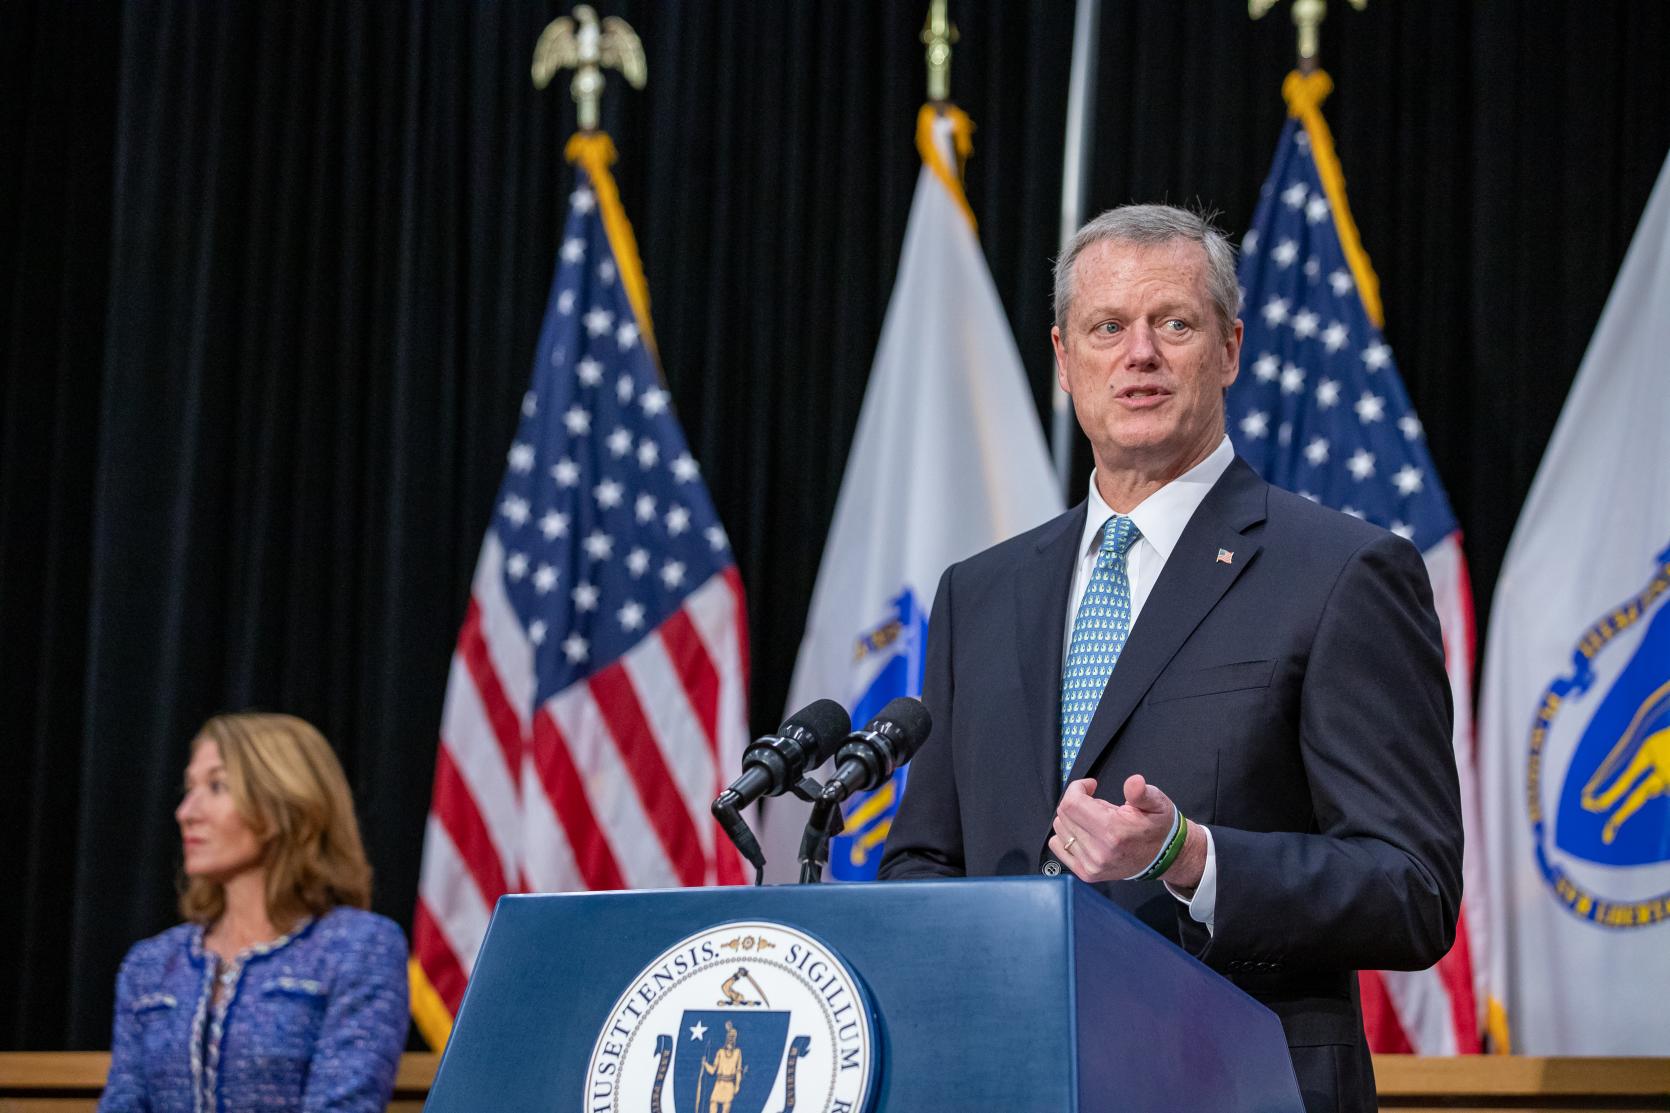 Reopening Massachusetts: Baker-Polito Administration Initiates Transition to Step Two of Second Phase of Four-Phase Approach